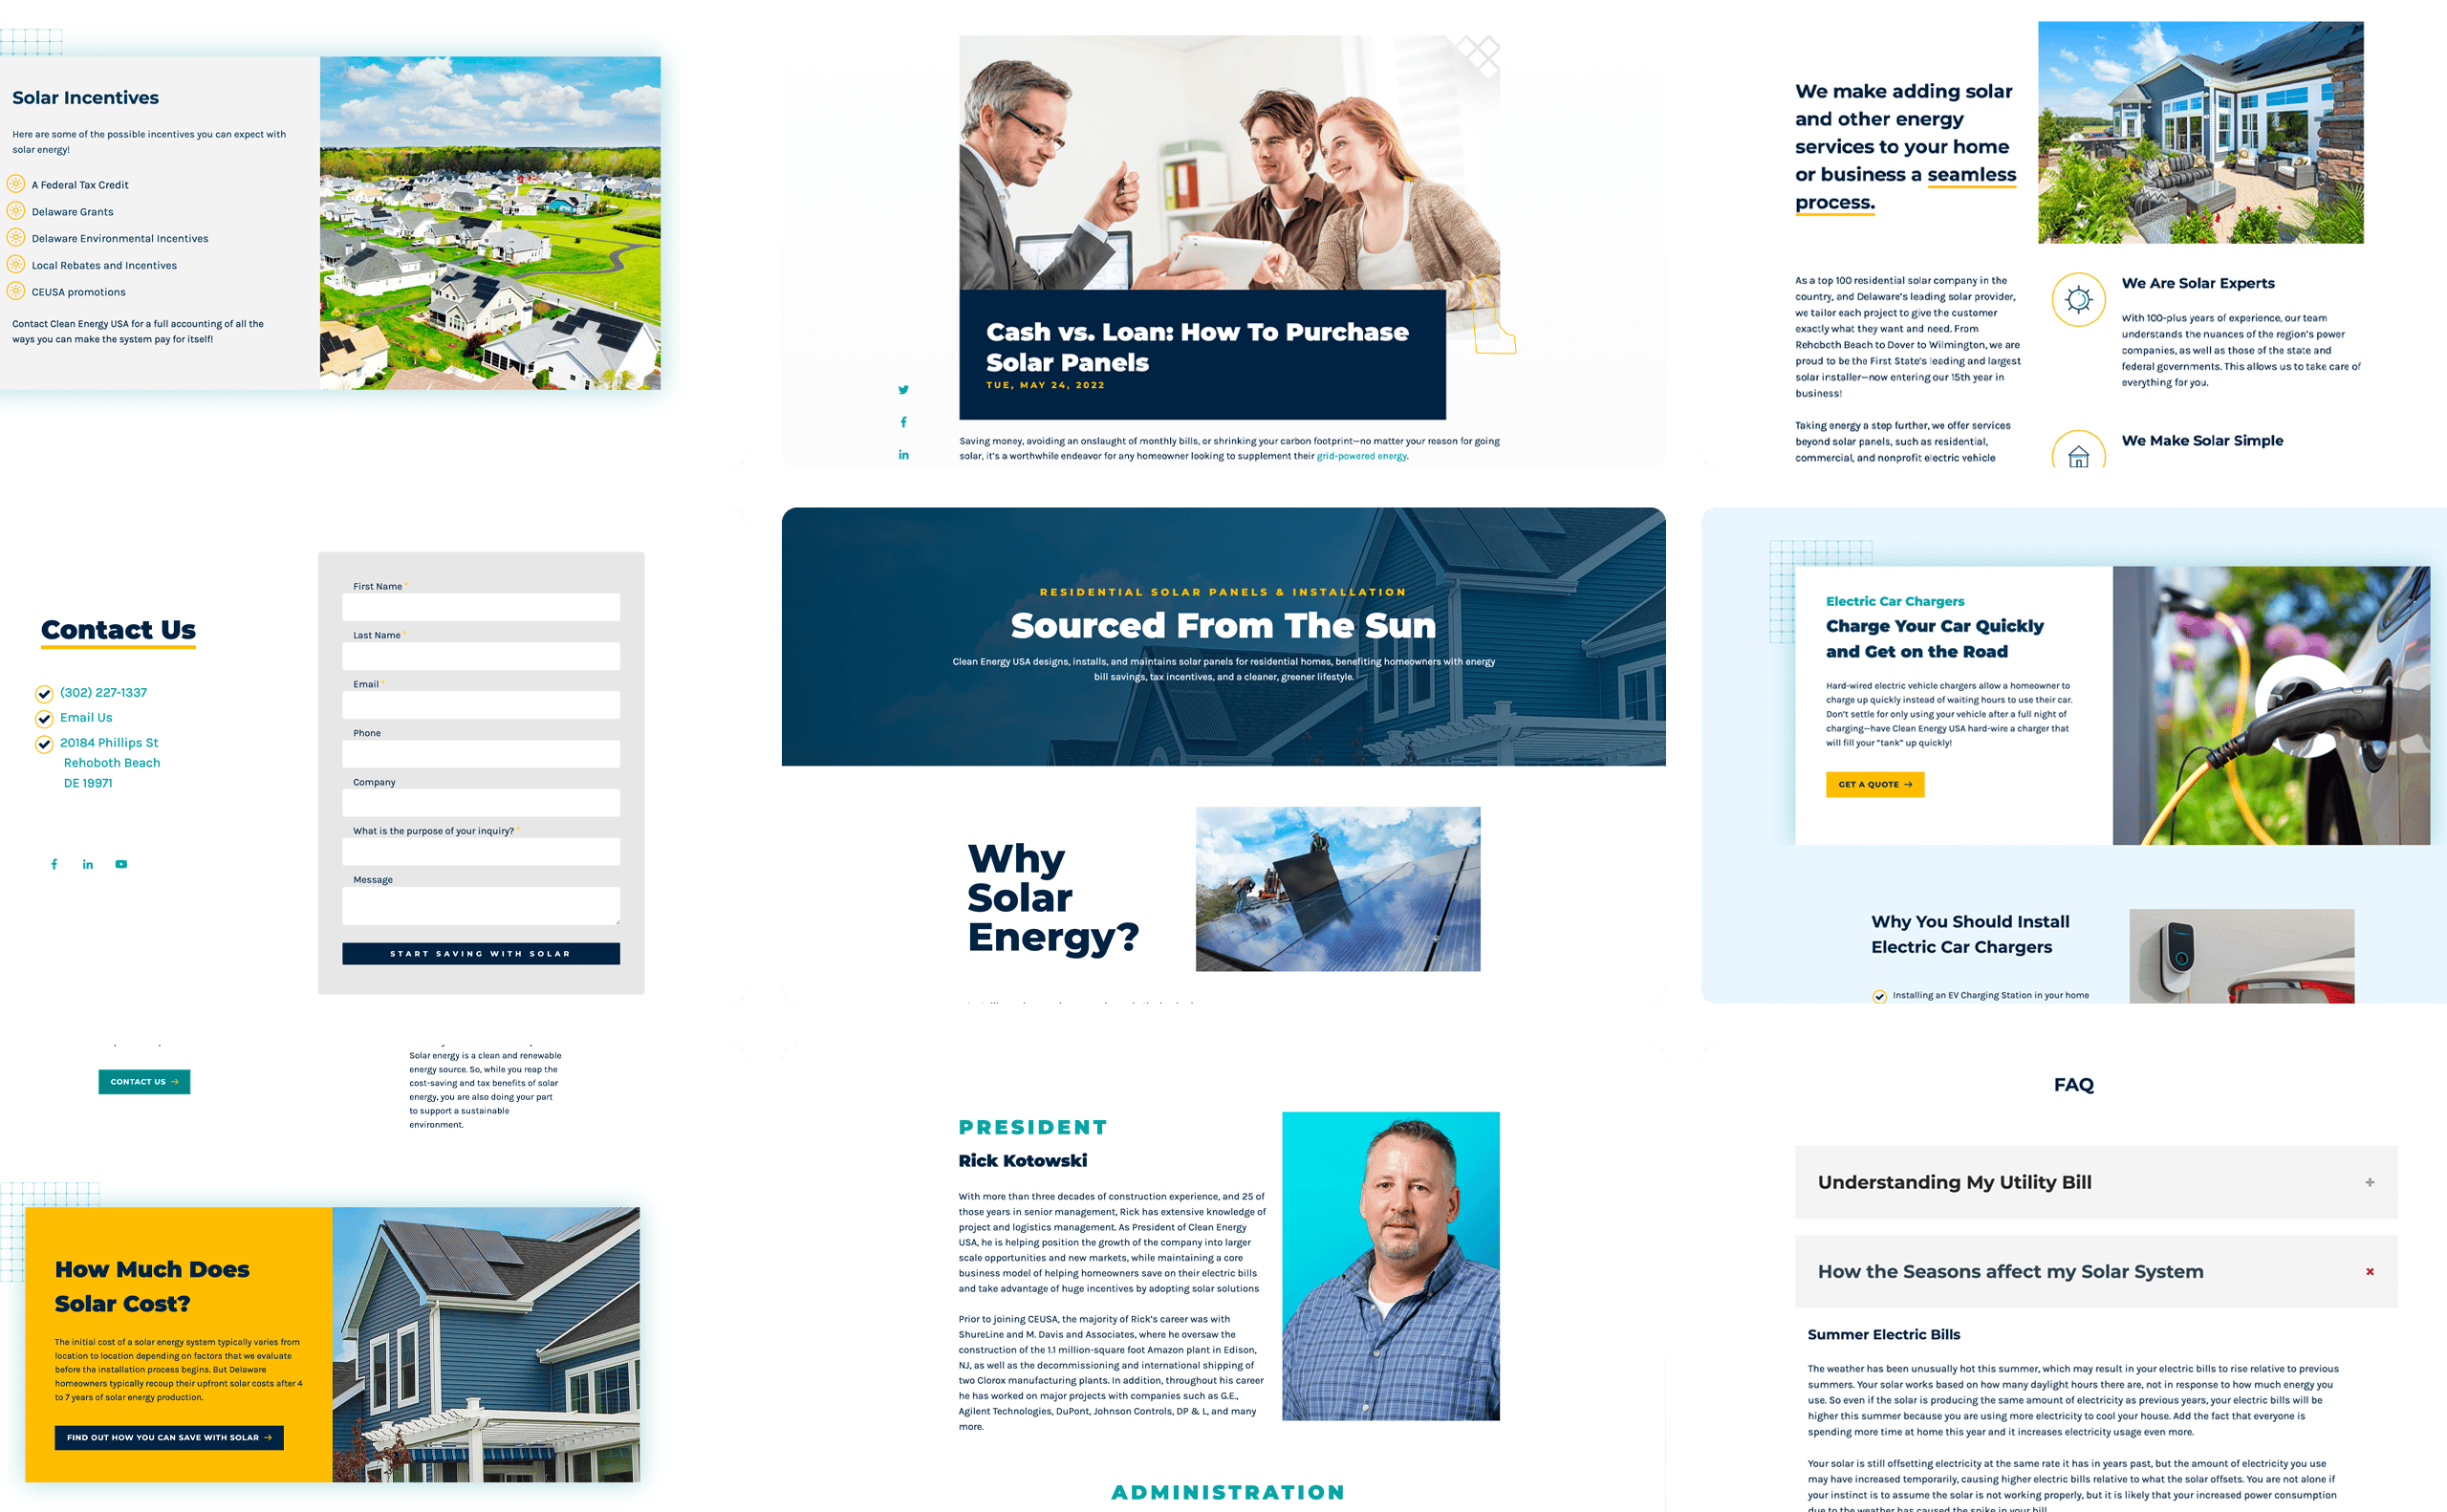 various screenshots of images from Clean Energy USA website